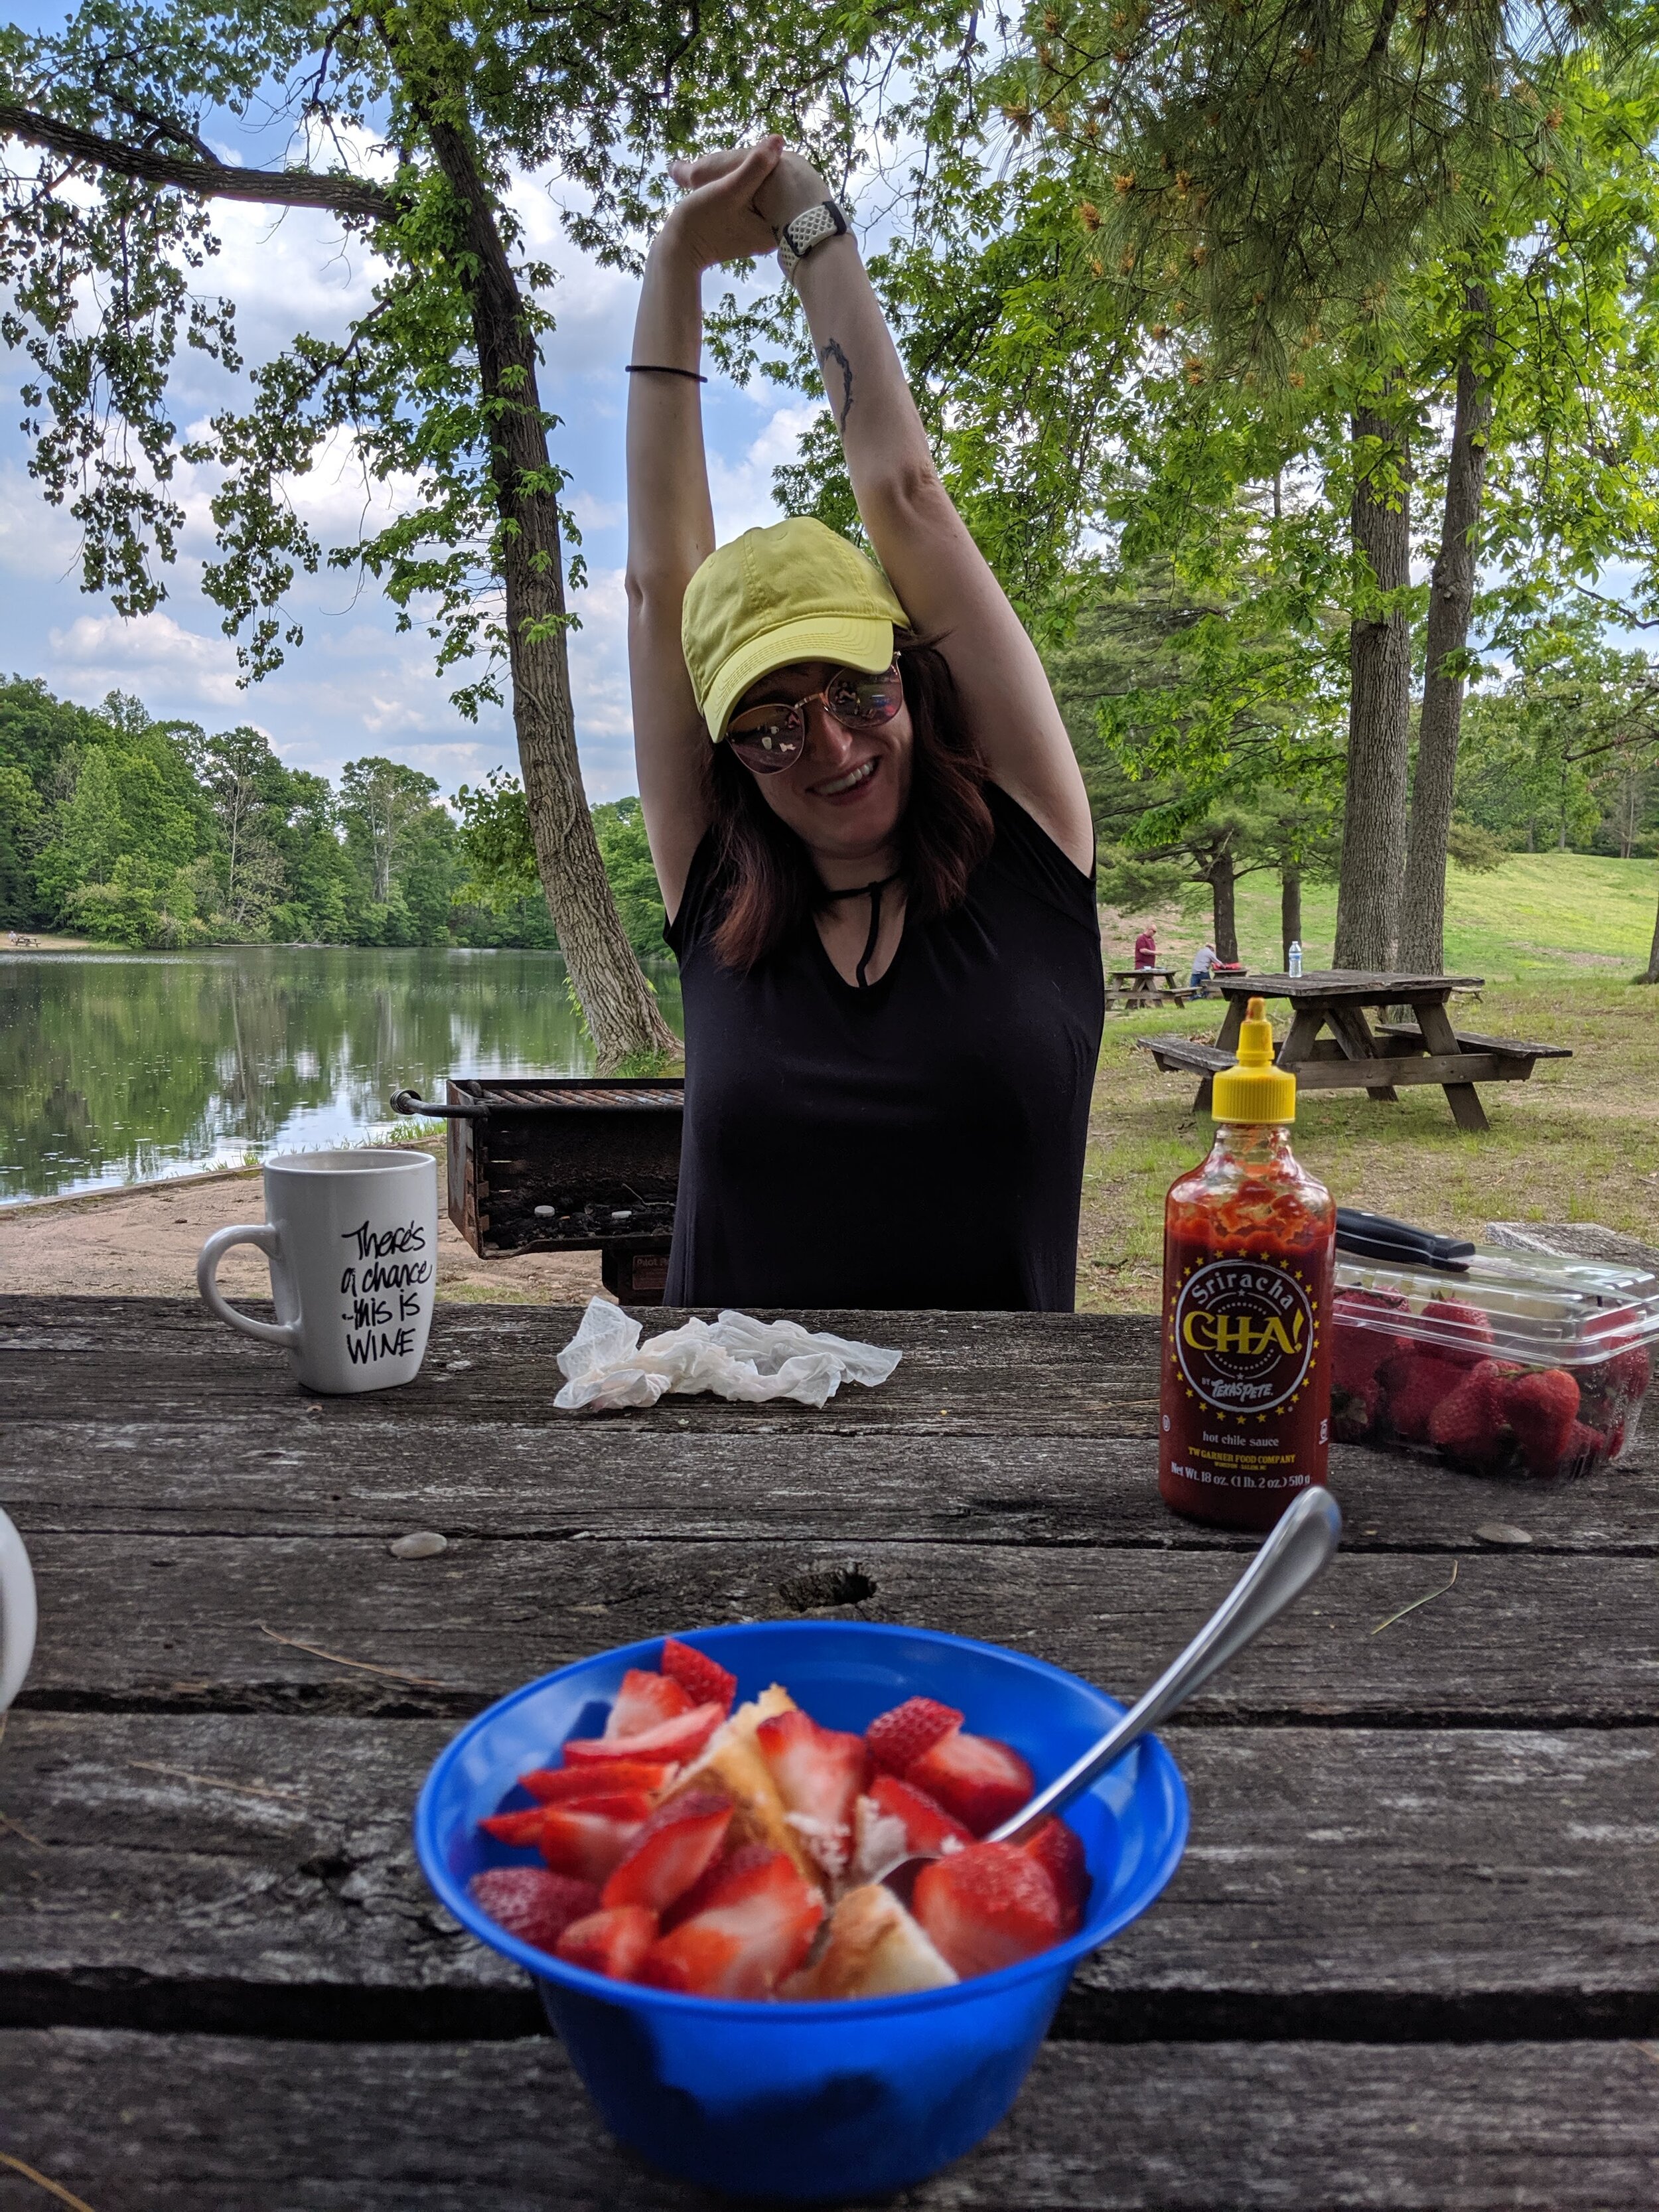  Strawberries and stretches at a free campsite in Connecticut 